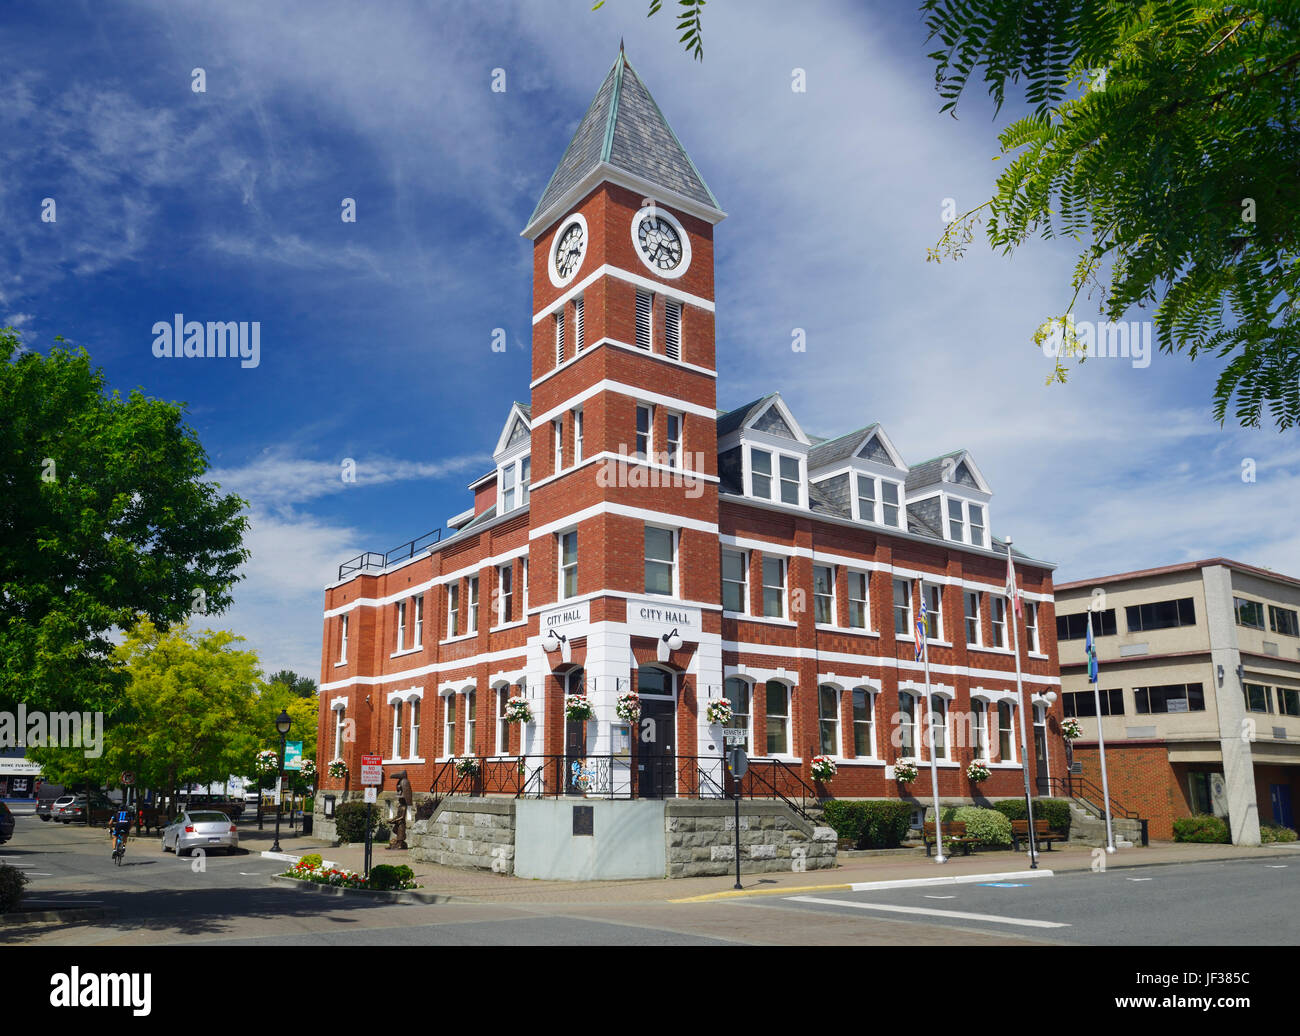 City Hall building in downtown Duncan, Cowichan Valley, Vancouver Island, British Columbia, Canada 2017. Stock Photo